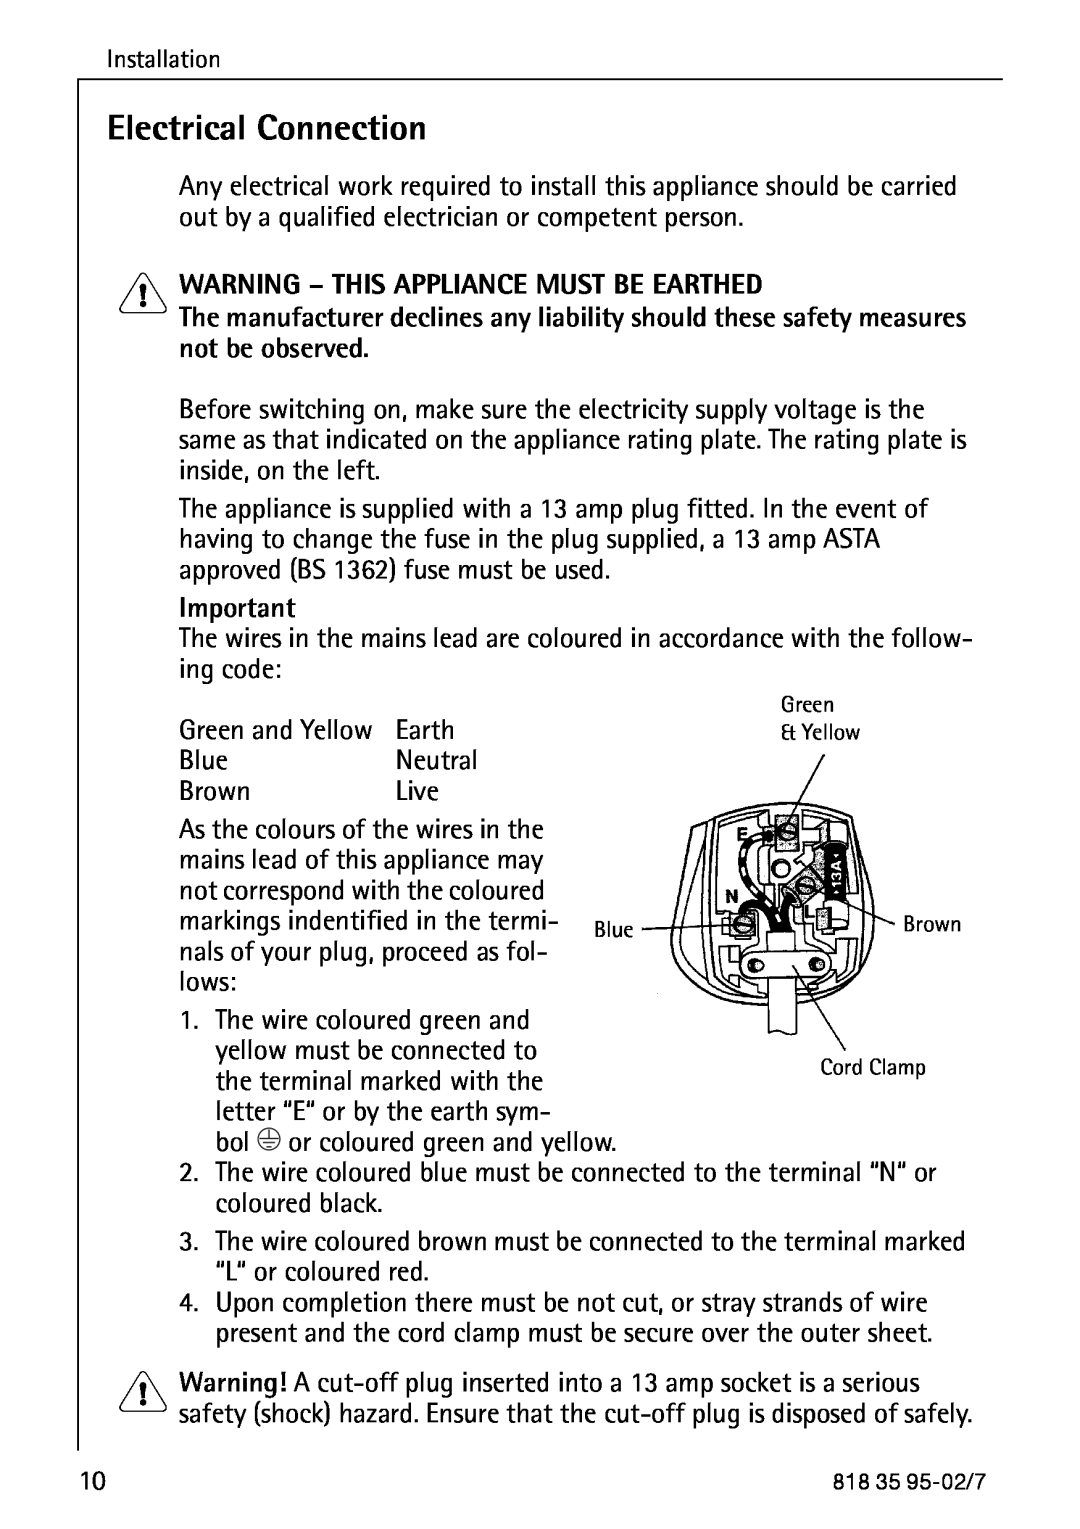 AEG S75578KG3 manual Electrical Connection, Warning - This Appliance Must Be Earthed 